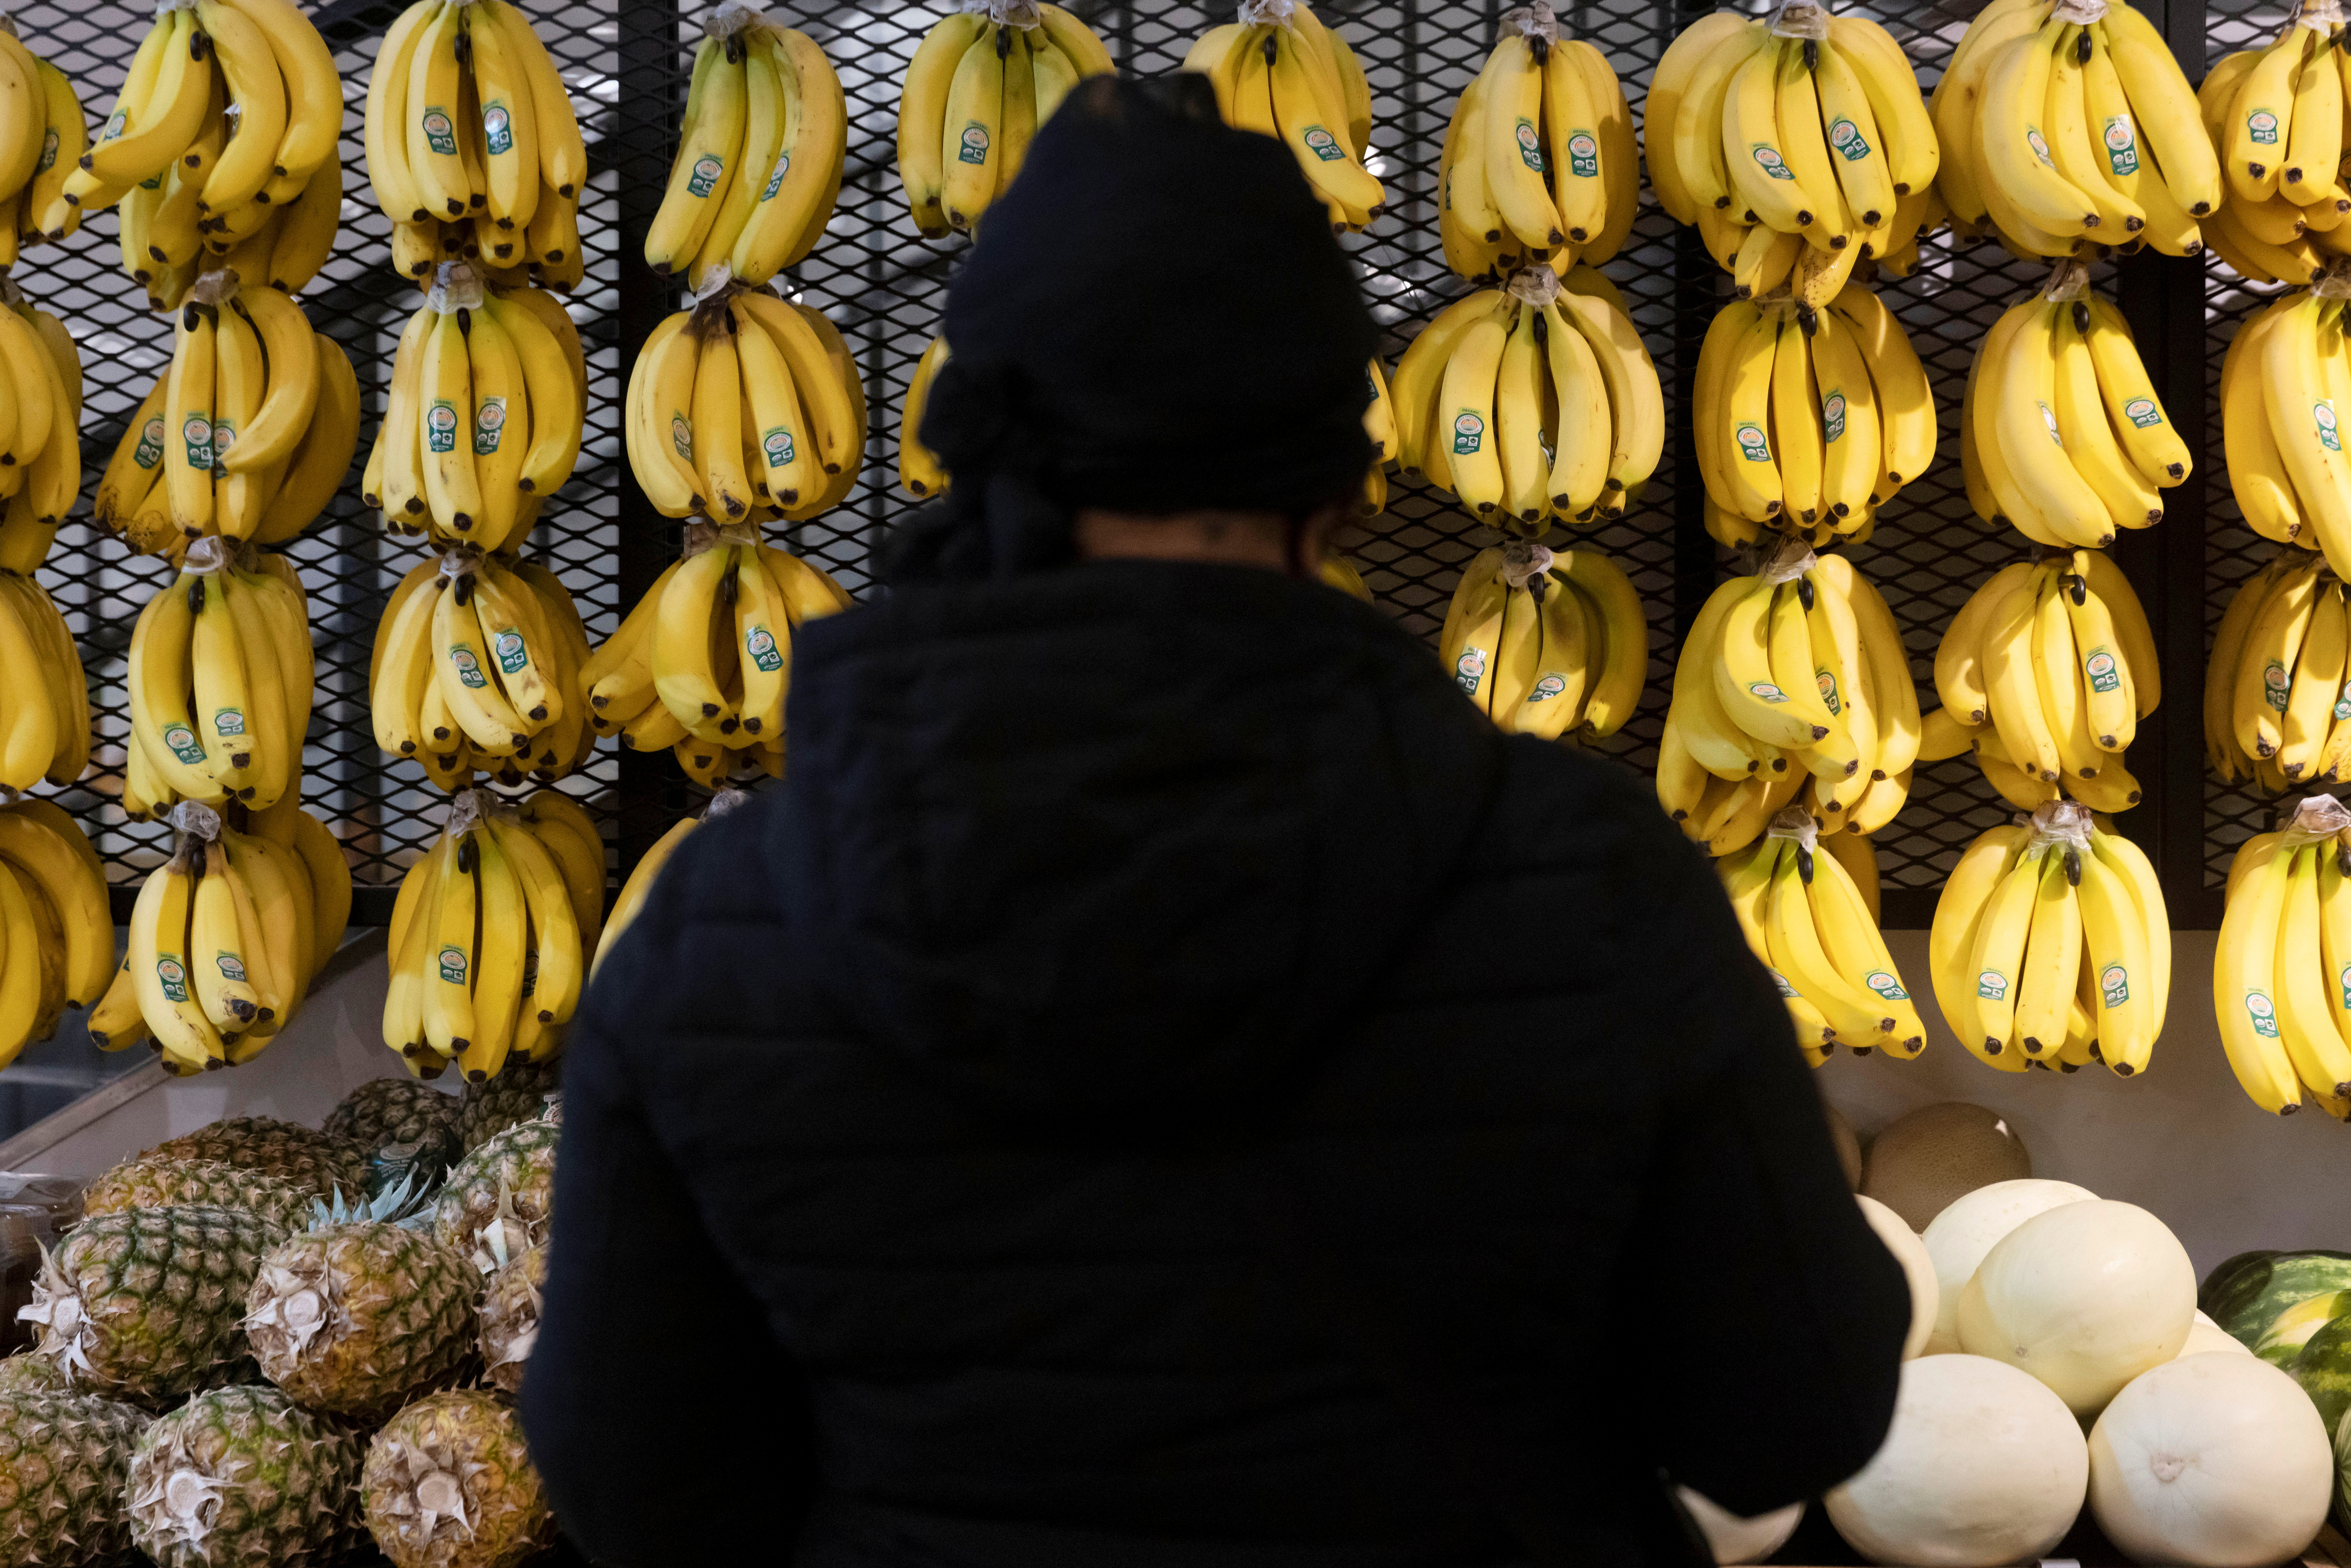 A person shops in a supermarket selling fruit and vegetables in Manhattan, New York City